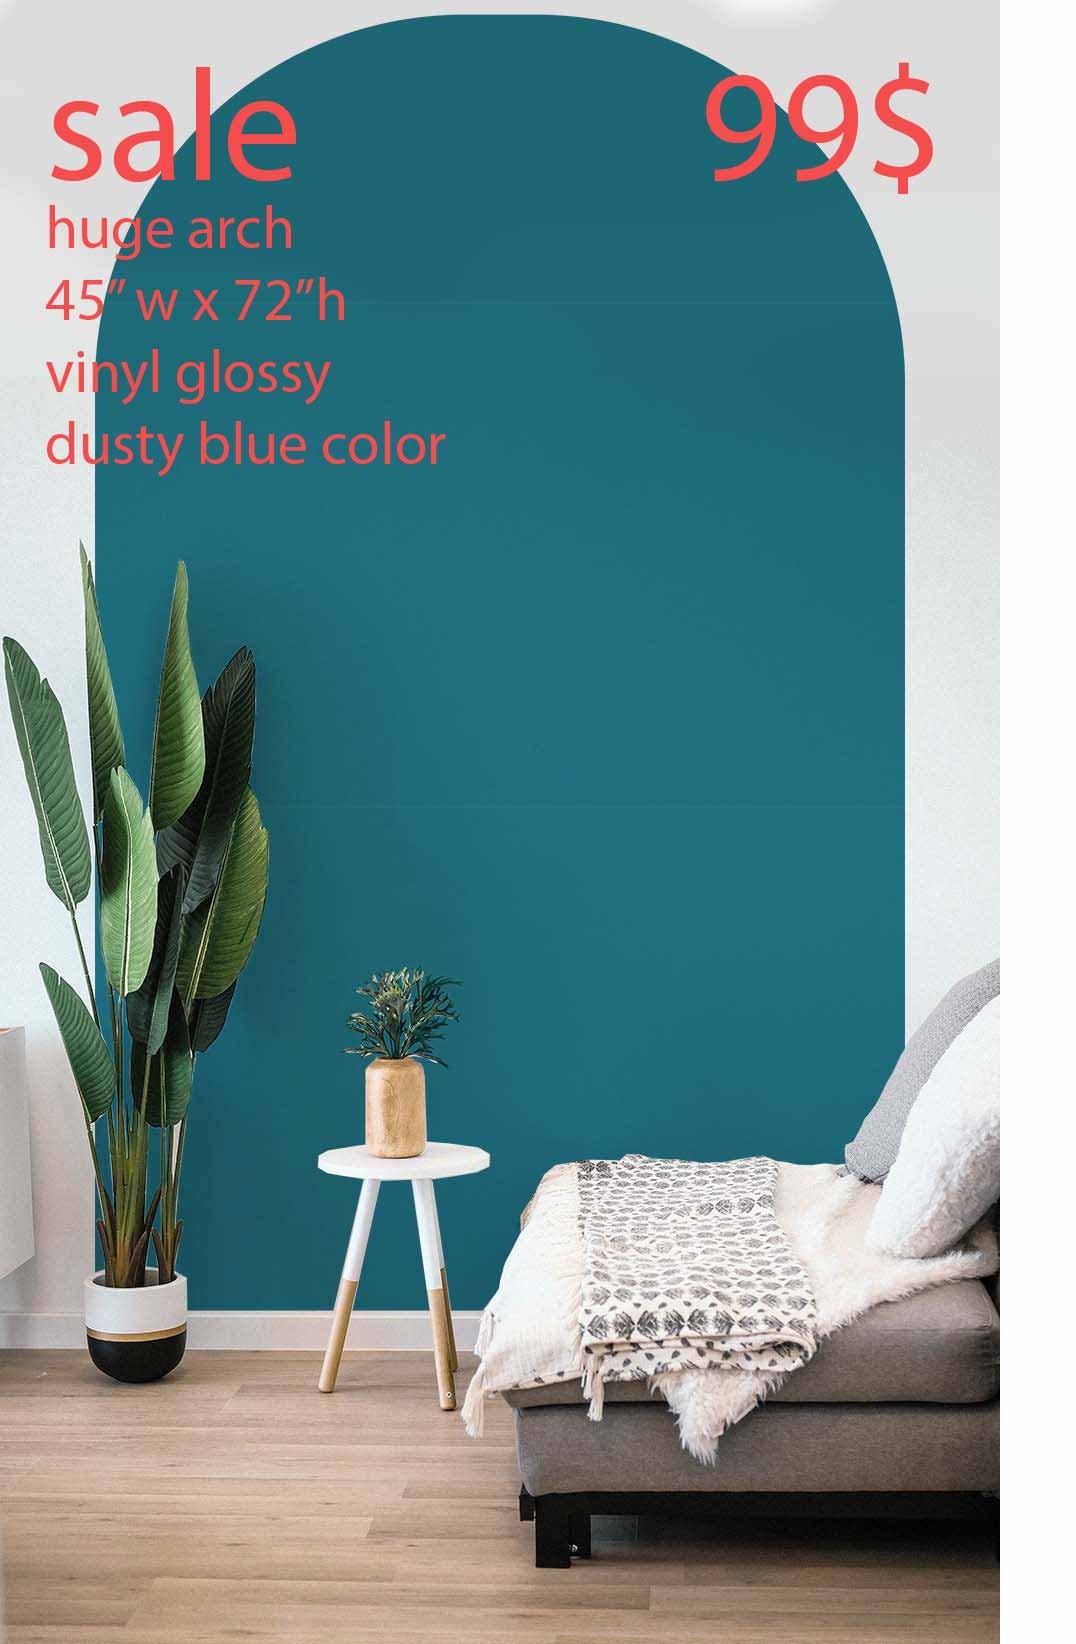 Arch Wall Decal Colour Block Sticker Large Sale